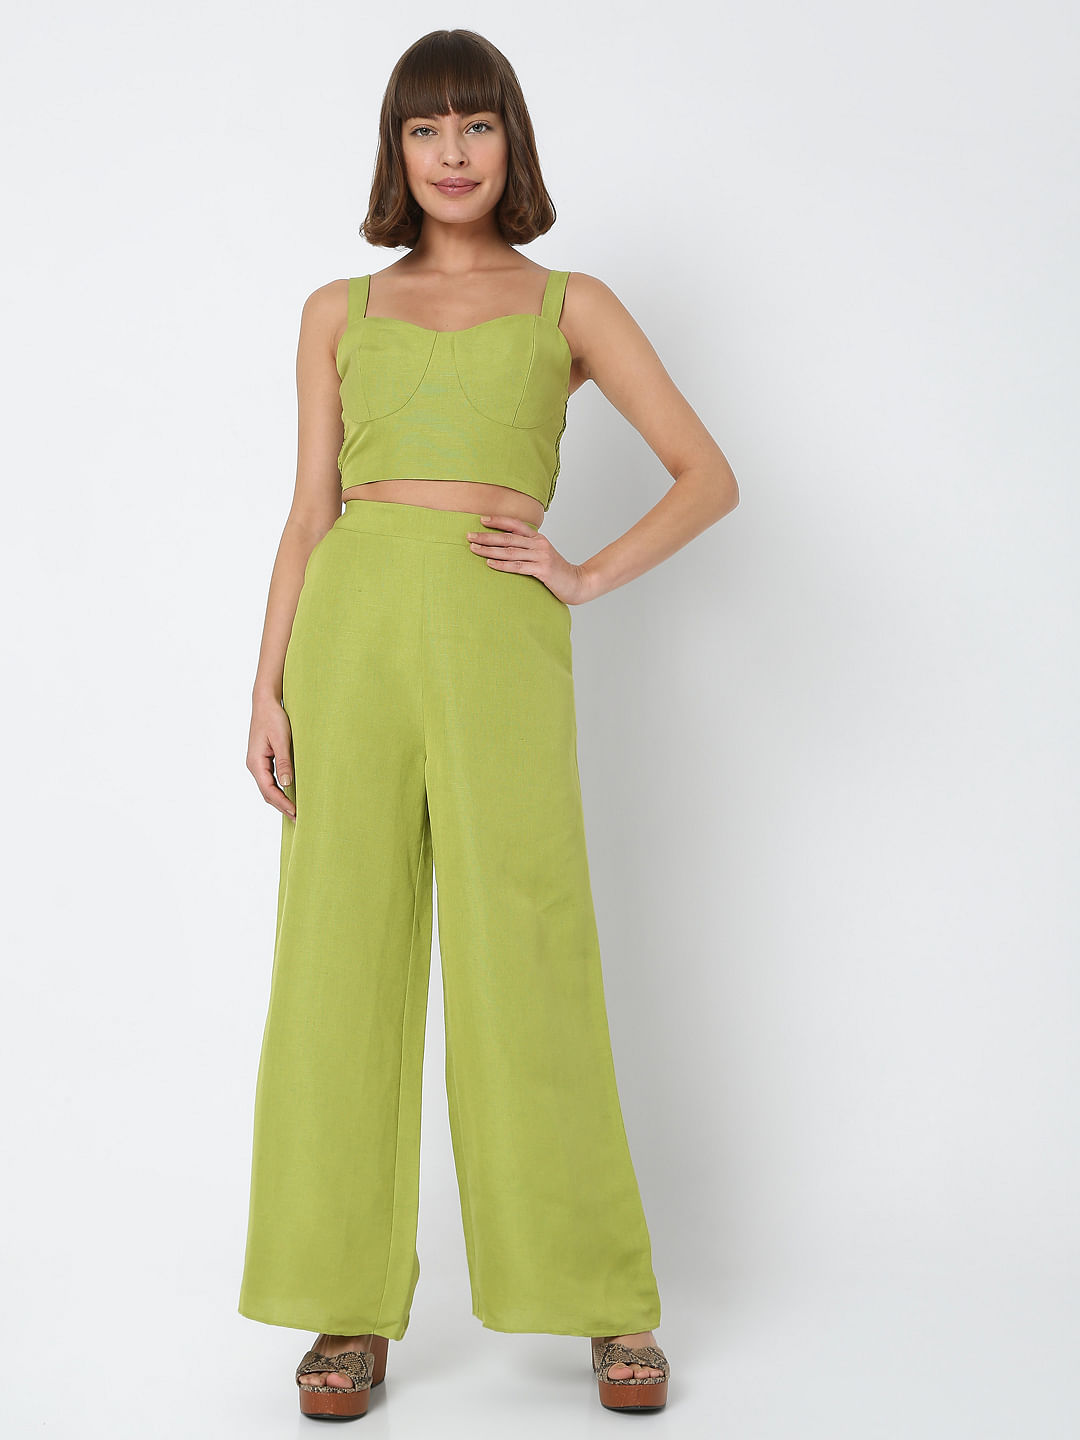 COVER STORY Trousers and Pants  Buy COVER STORY Olive Wide Leg Basic  Trousers with Belt Set of 2 Online  Nykaa Fashion